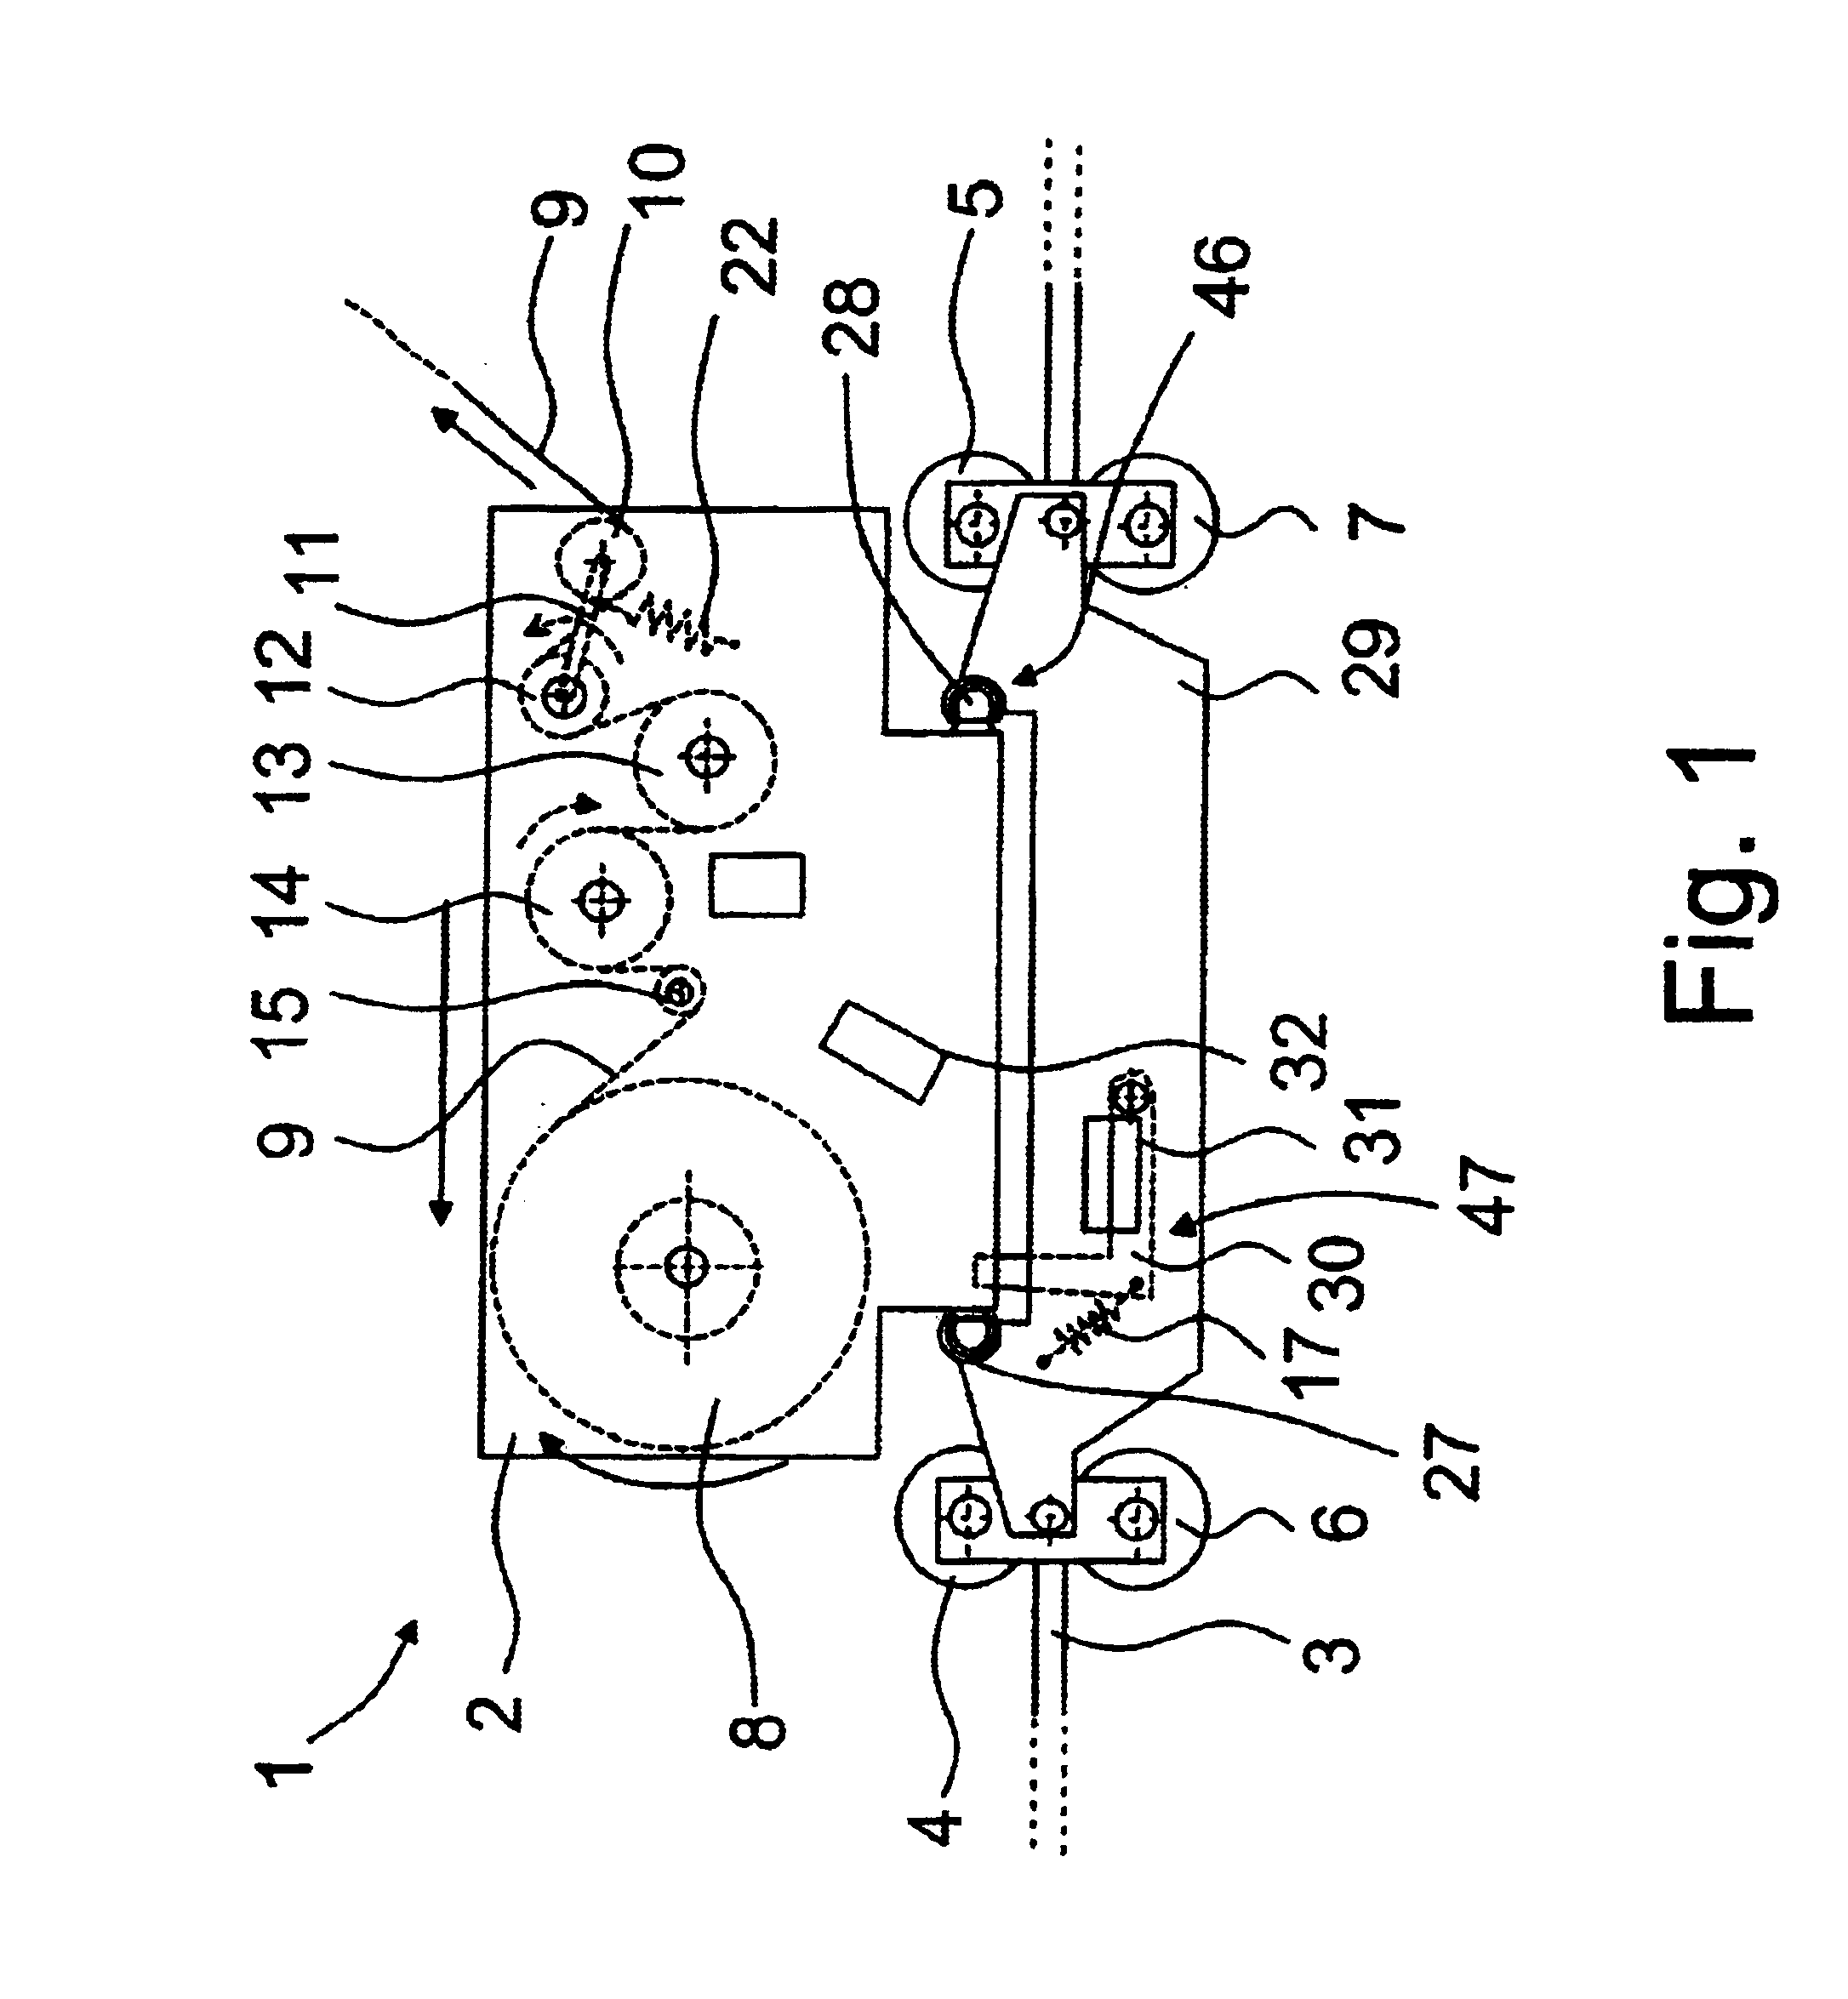 Film feeding device and an automatic wrapping device